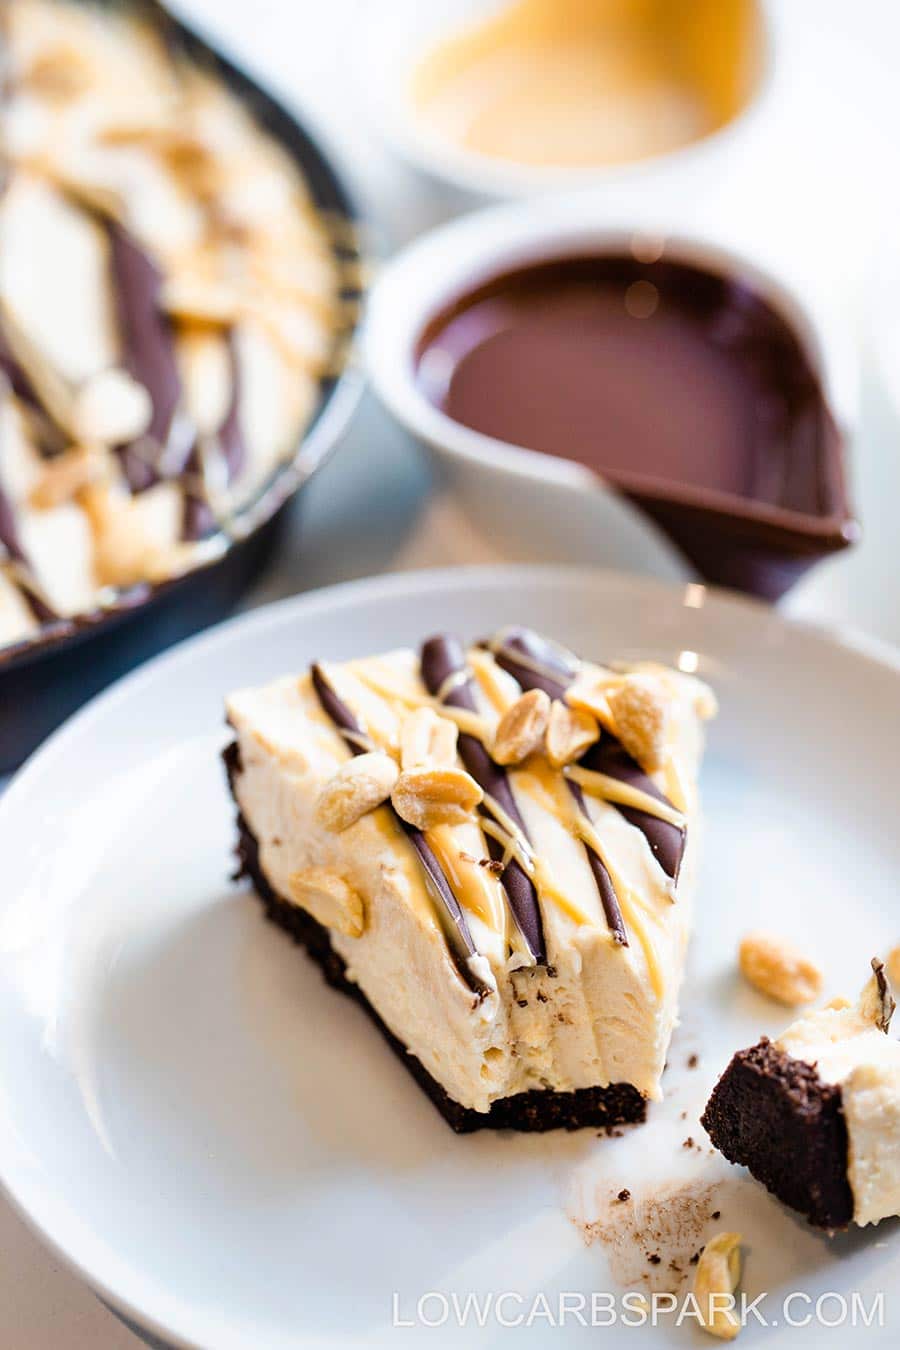 Learn how to make this homemade Keto Peanut Butter Pie from scratch with just a few low carb ingredients. It's a crazy creamy no-bake keto pie that everyone loves. This dreamy low carb pie has a chocolatey Oreo like crust and a luscious sugar-free peanut butter filling.